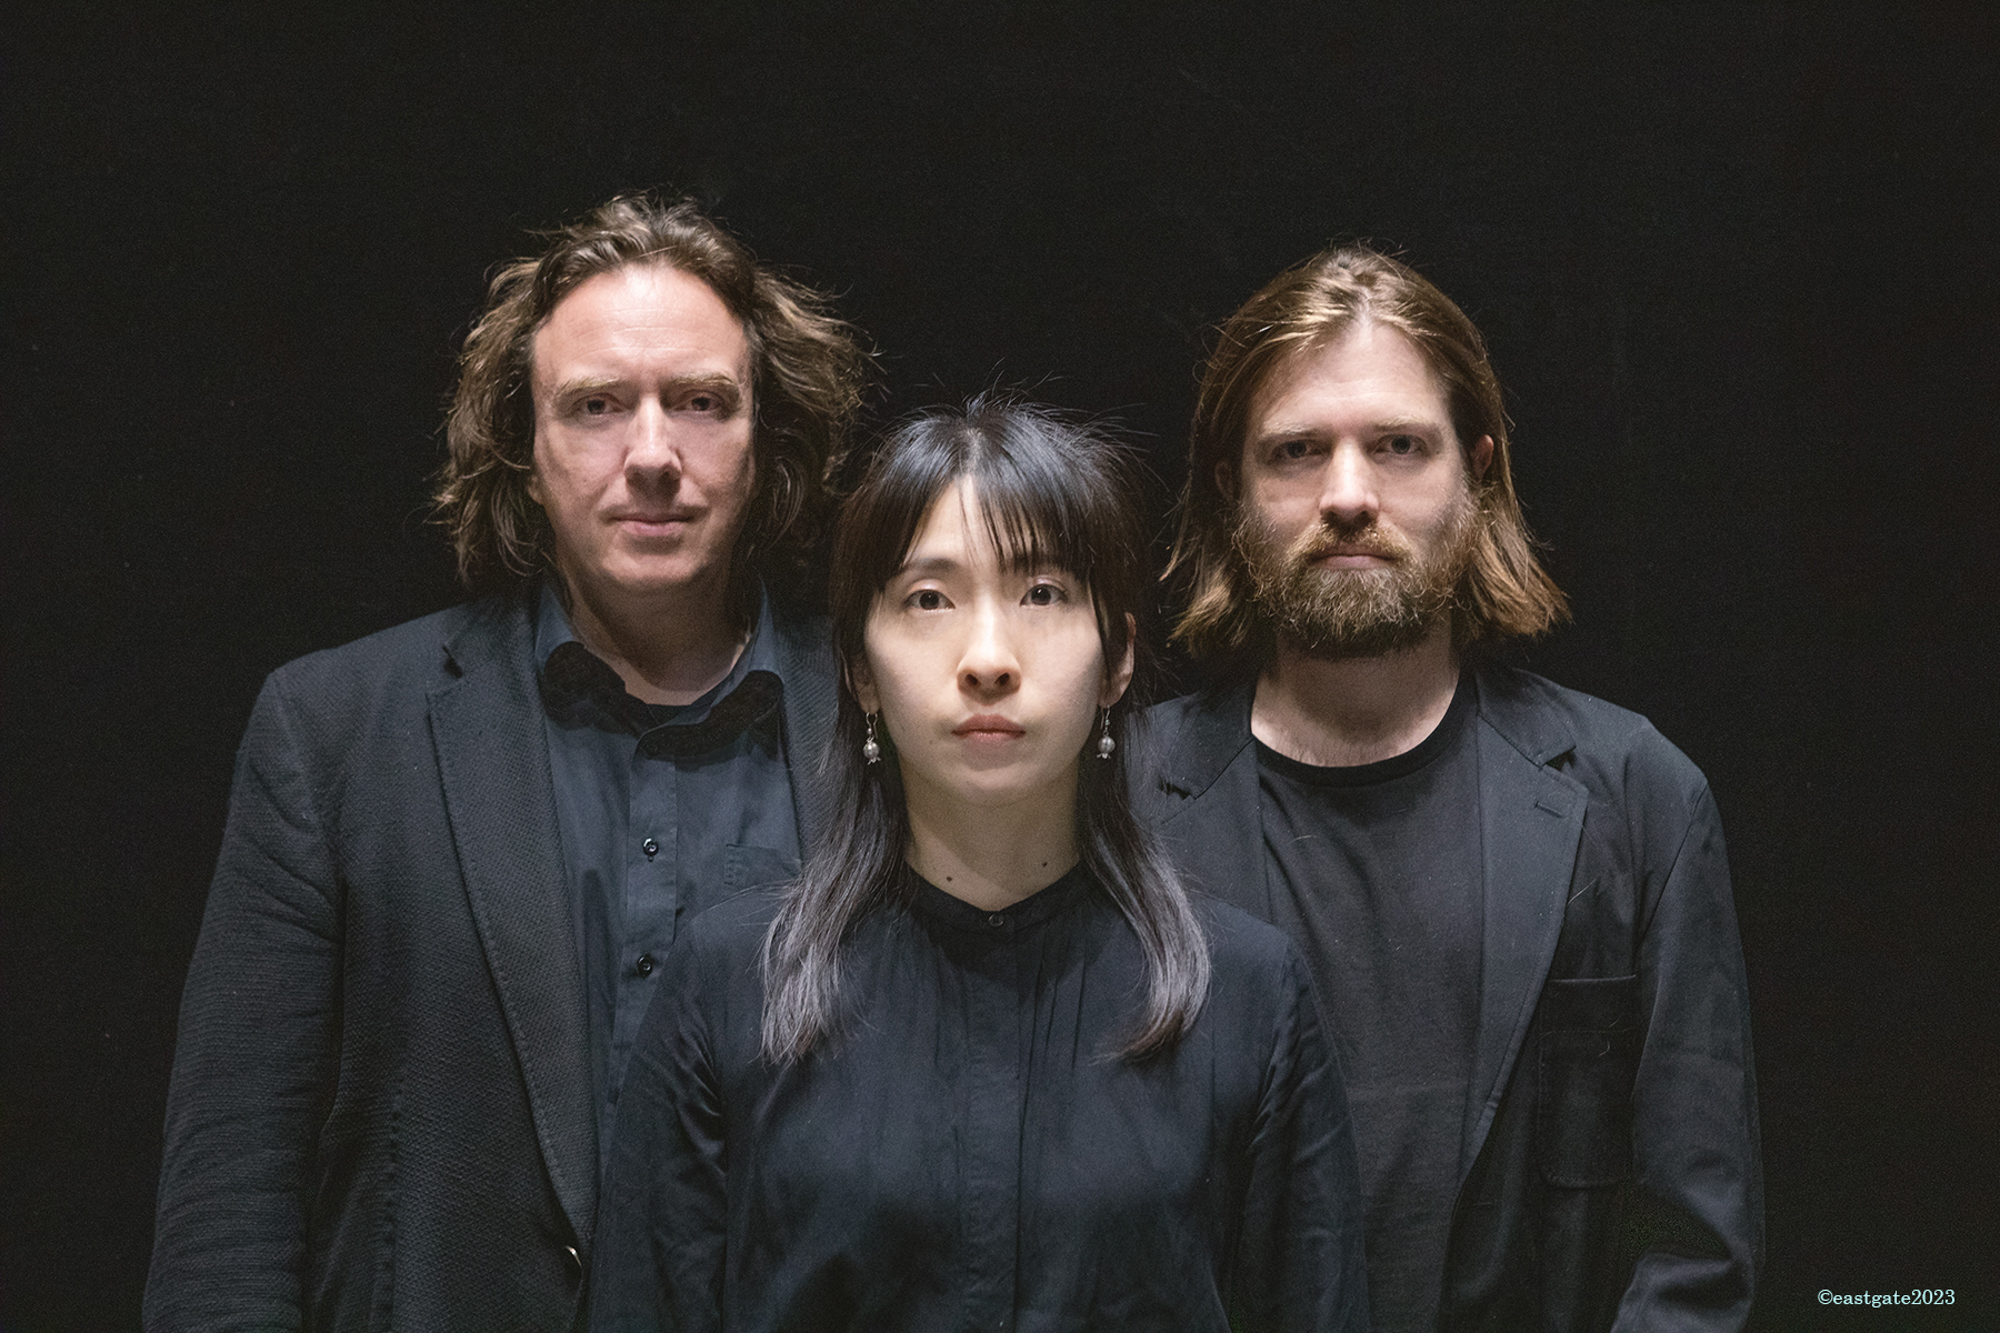 The current Tangerine Dream tour of (left to right) Thorsten Quaeschning, Hoshiko Yamane, and Paul Frick. Photo by Melanie Reinisch. 